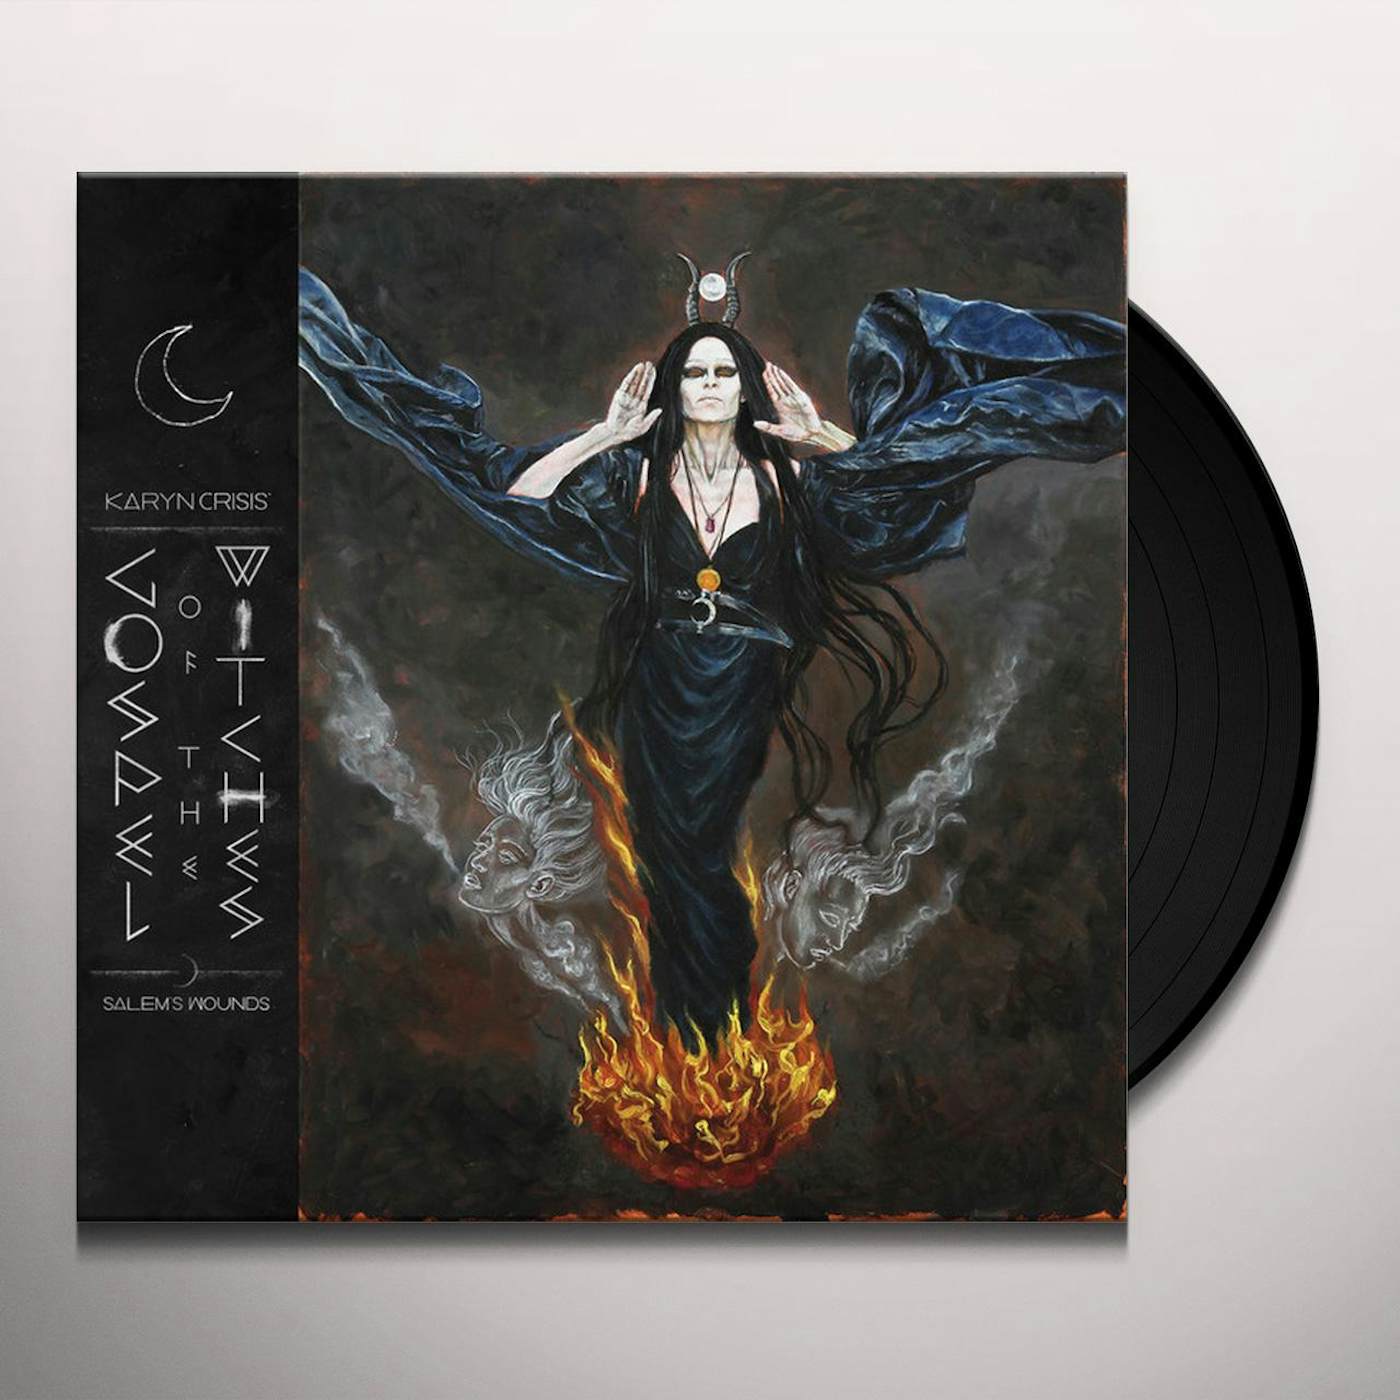 Karyn Crisis’ Gospel Of The Witches Salem's Wounds Vinyl Record